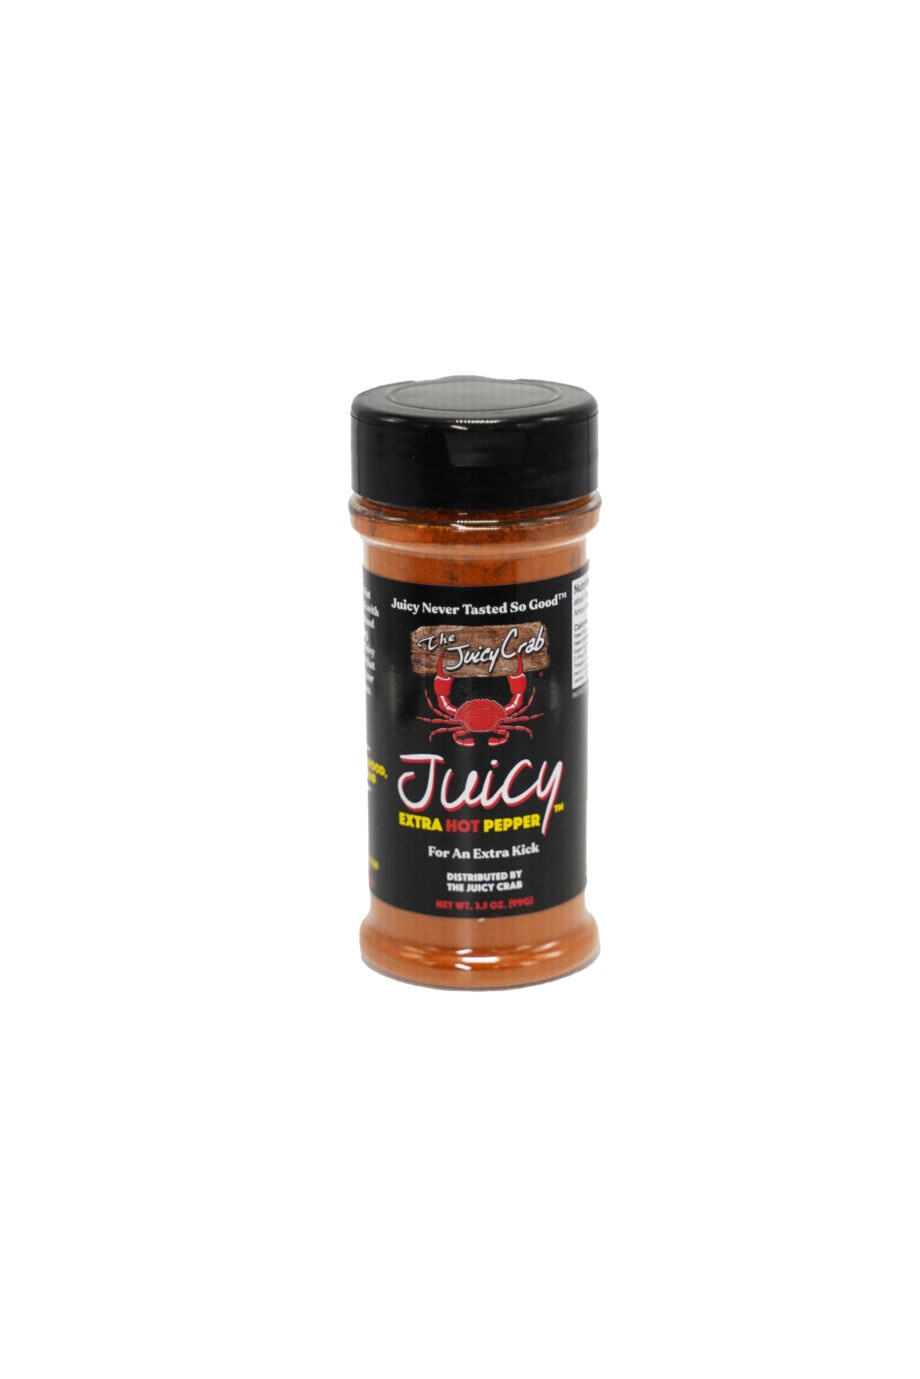 Juicy Special Extra Hot Pepper Powder by The Juicy Crab | 3.5OZ (99g)